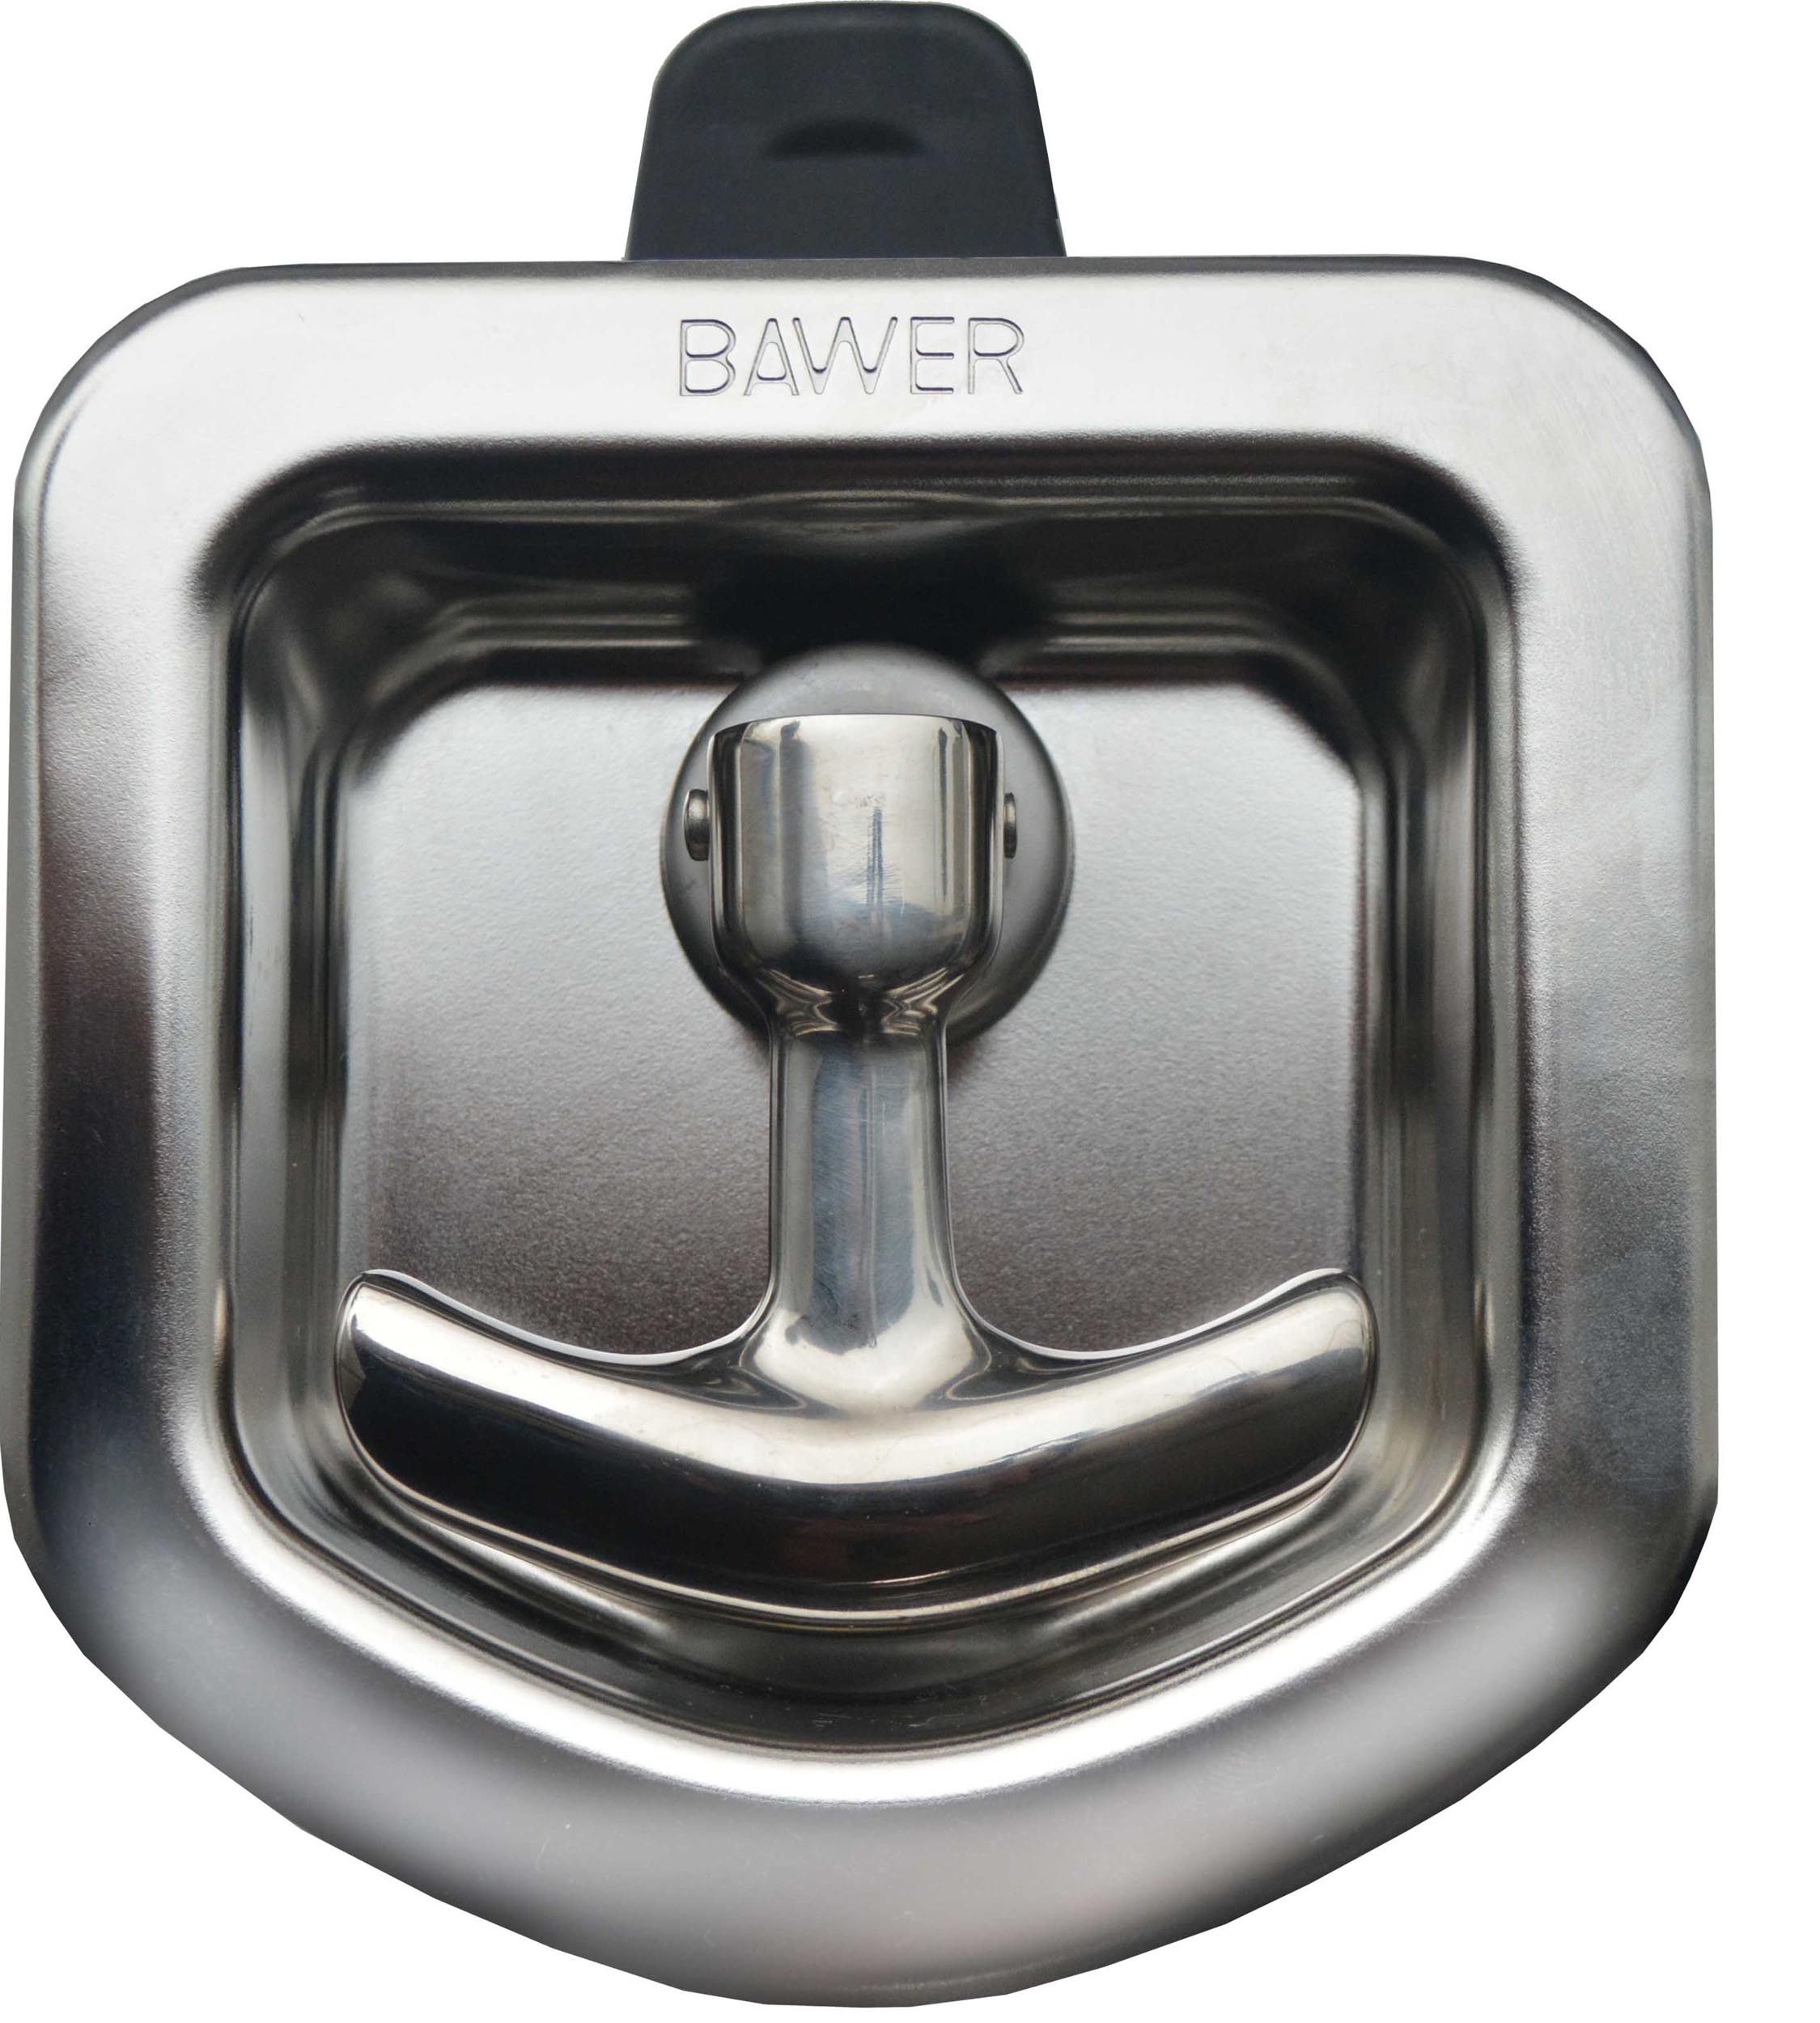 Bawer Stainless Steel lock with fixing studs